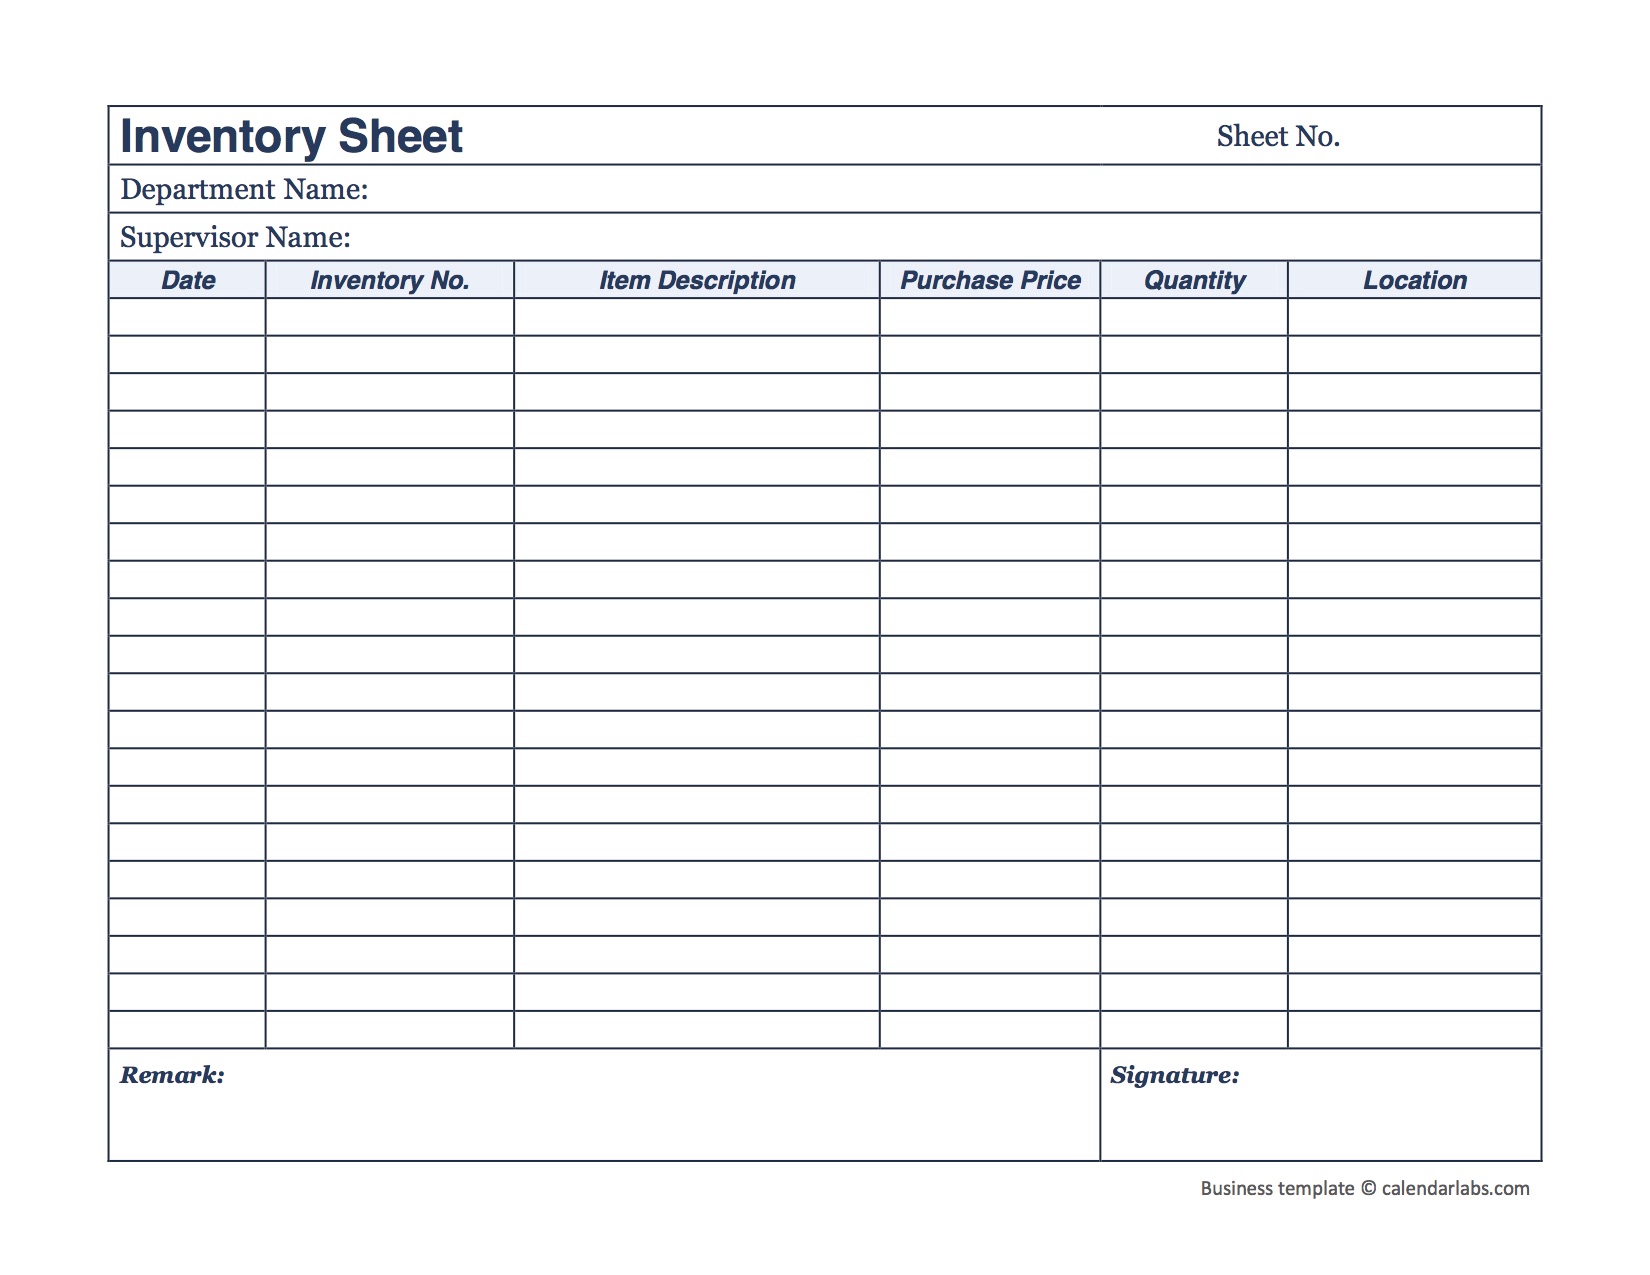 Business Inventory Template 2020 - Free Printable Templates